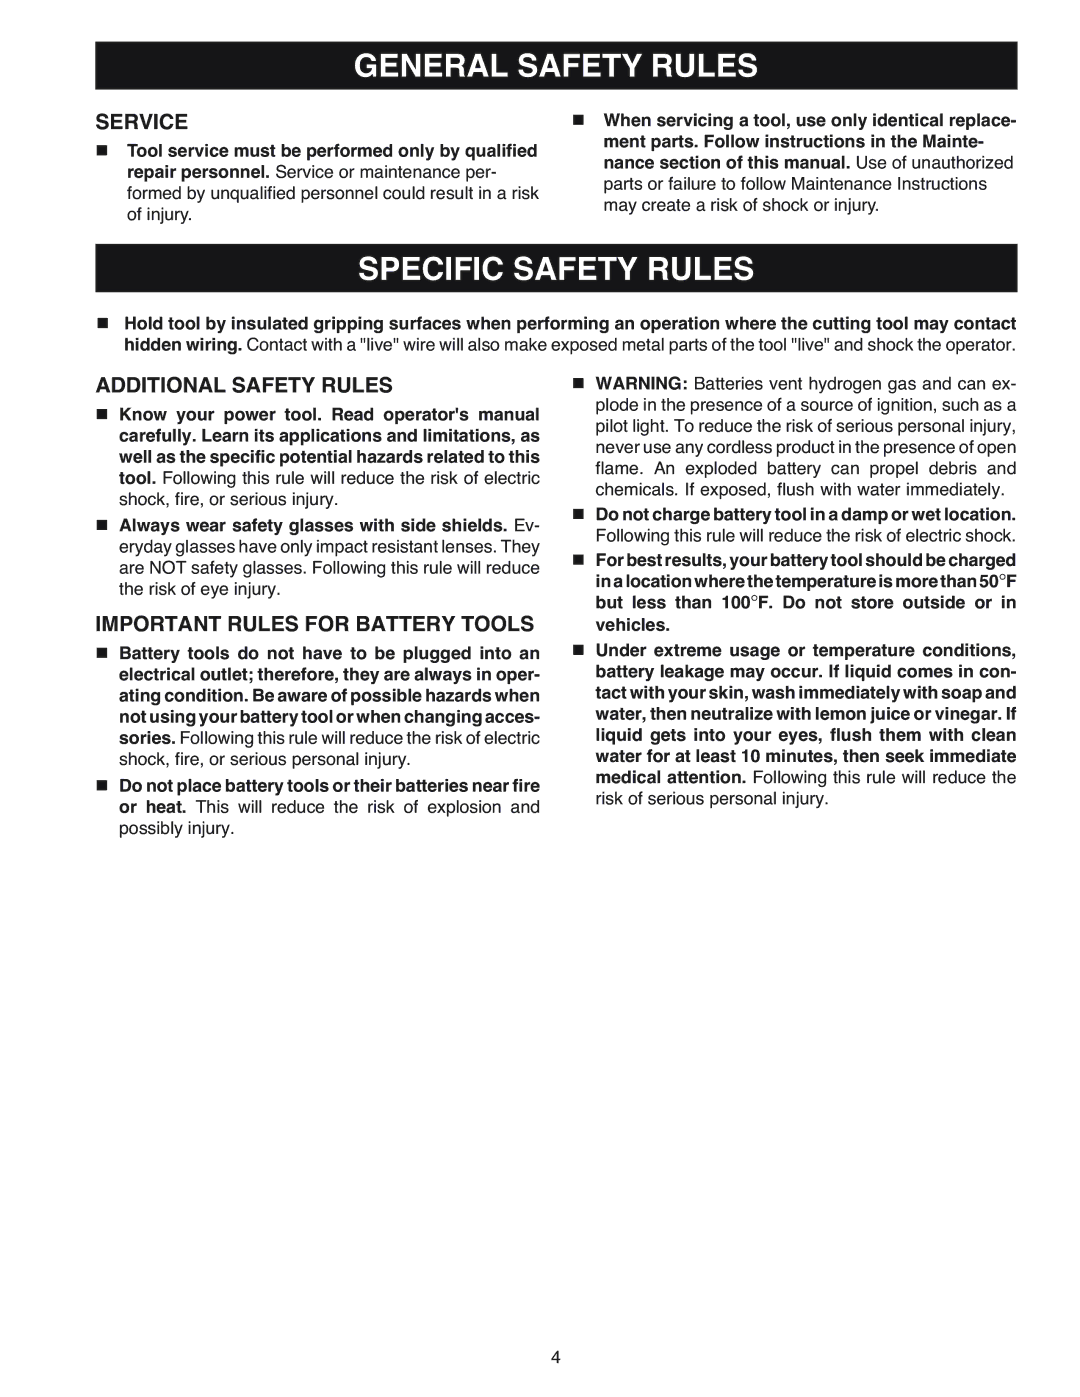 Ryobi OJ1802 manual Specific Safety Rules, Service, Additional Safety Rules, Important Rules for Battery Tools 